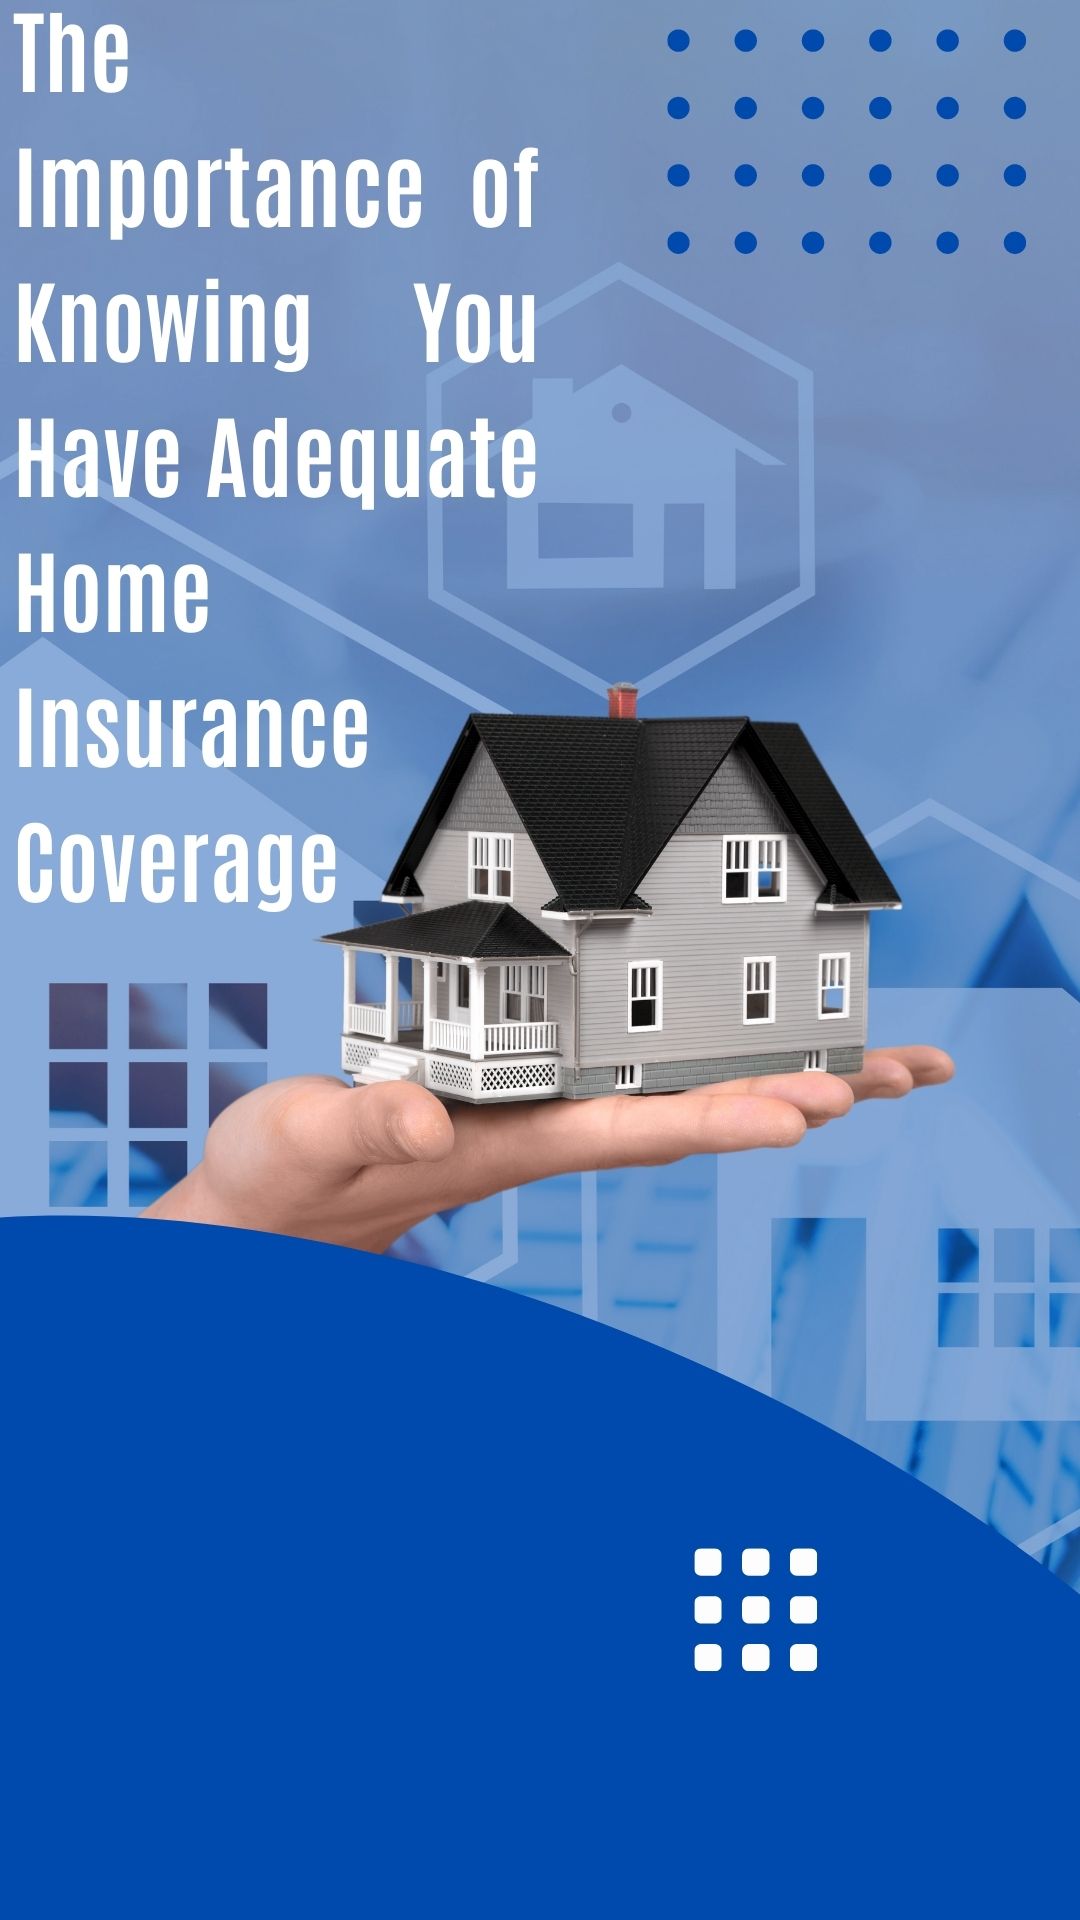 The Importance of Knowing You Have Adequete Home Insurance Coverage